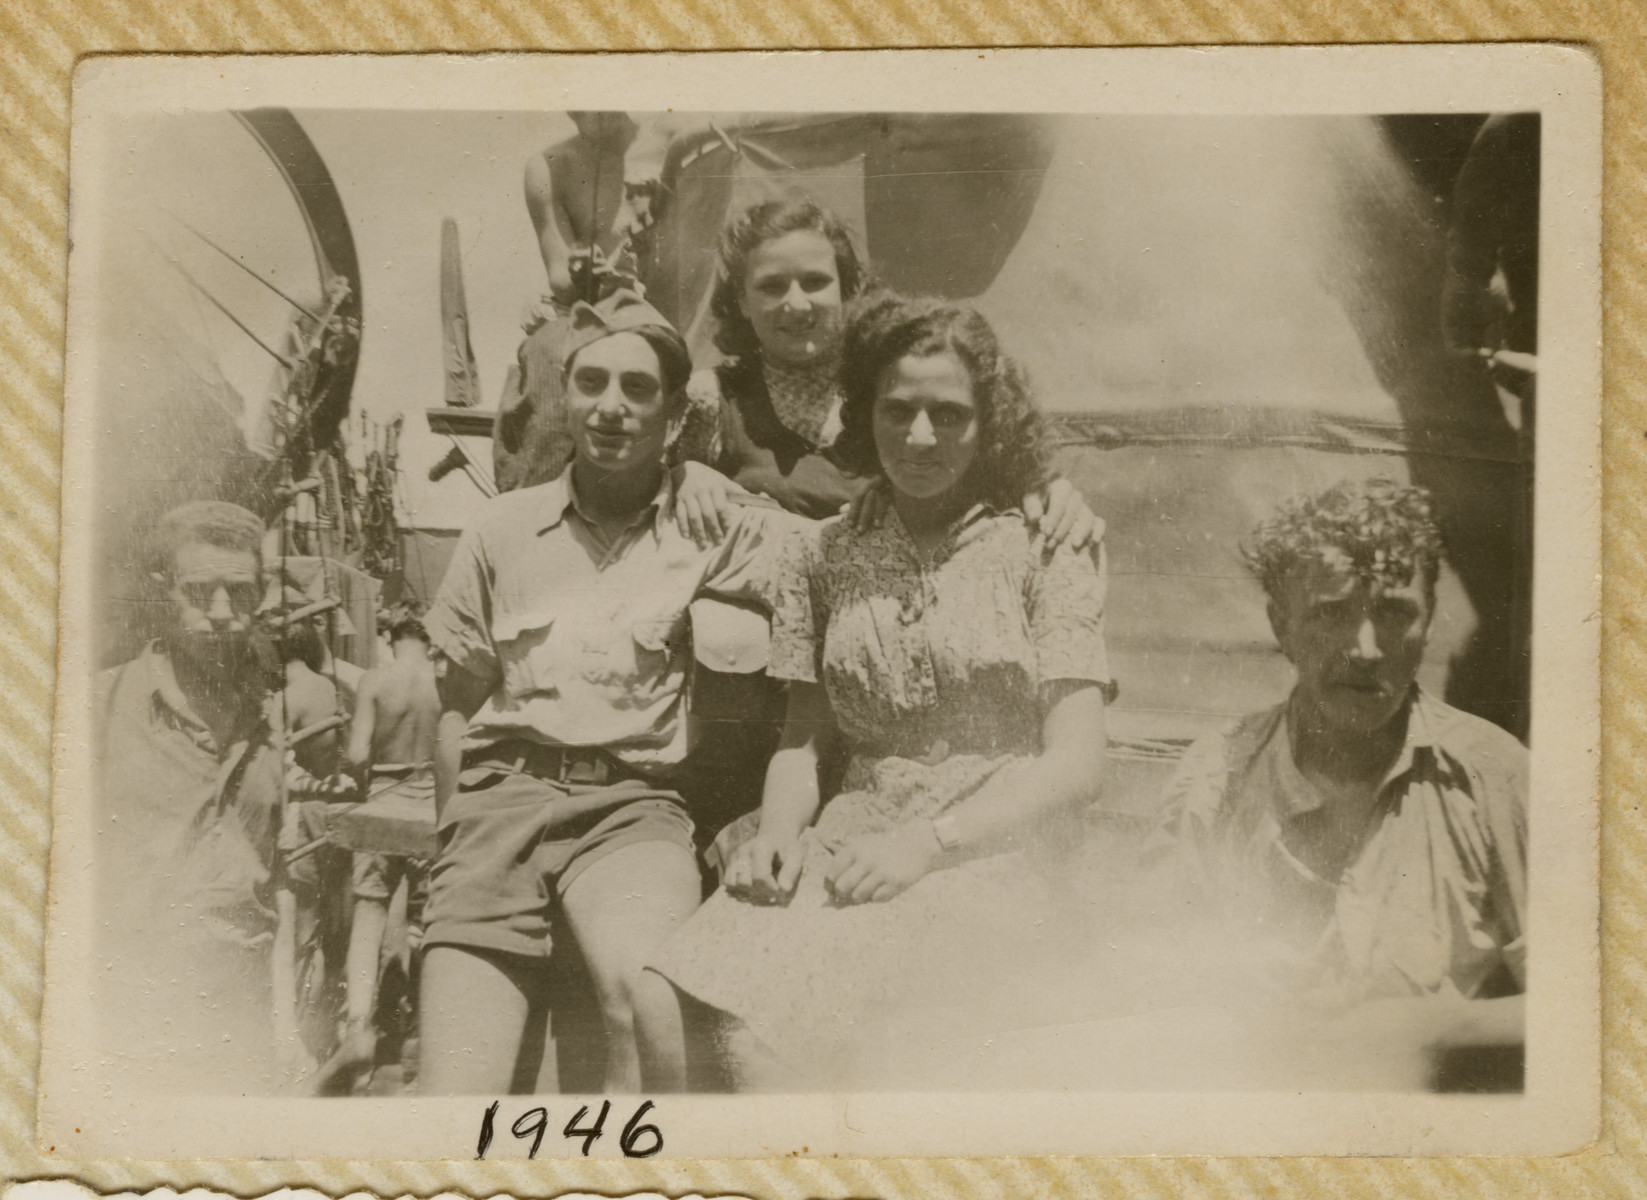 Jewish refugees pose on the deck of the Biriah while en route to Palestine.  

Pictured in the center are Robert, Miriam Ofer and Alitza.